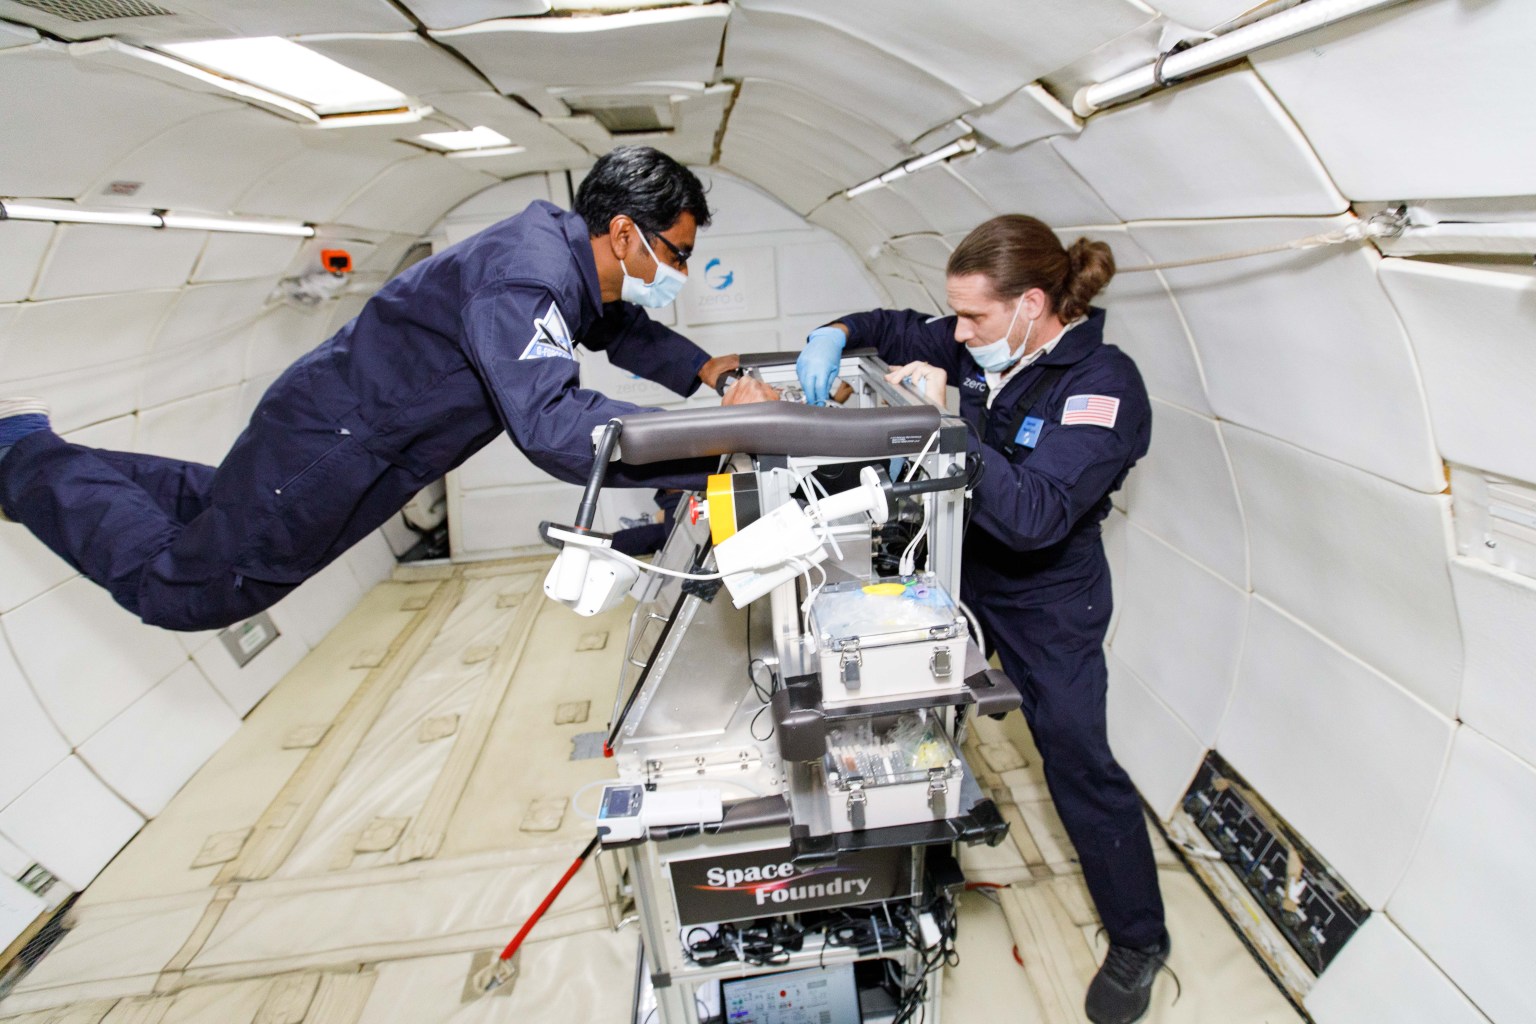 Space Foundry CEO and co-founder Dr. Ram Prasad Gandhiraman (left) and CTO and co-founder Dr. Dennis Nordlund operate the company’s plasma jet printing of electronics experiment in microgravity on a parabolic flight in December 2021